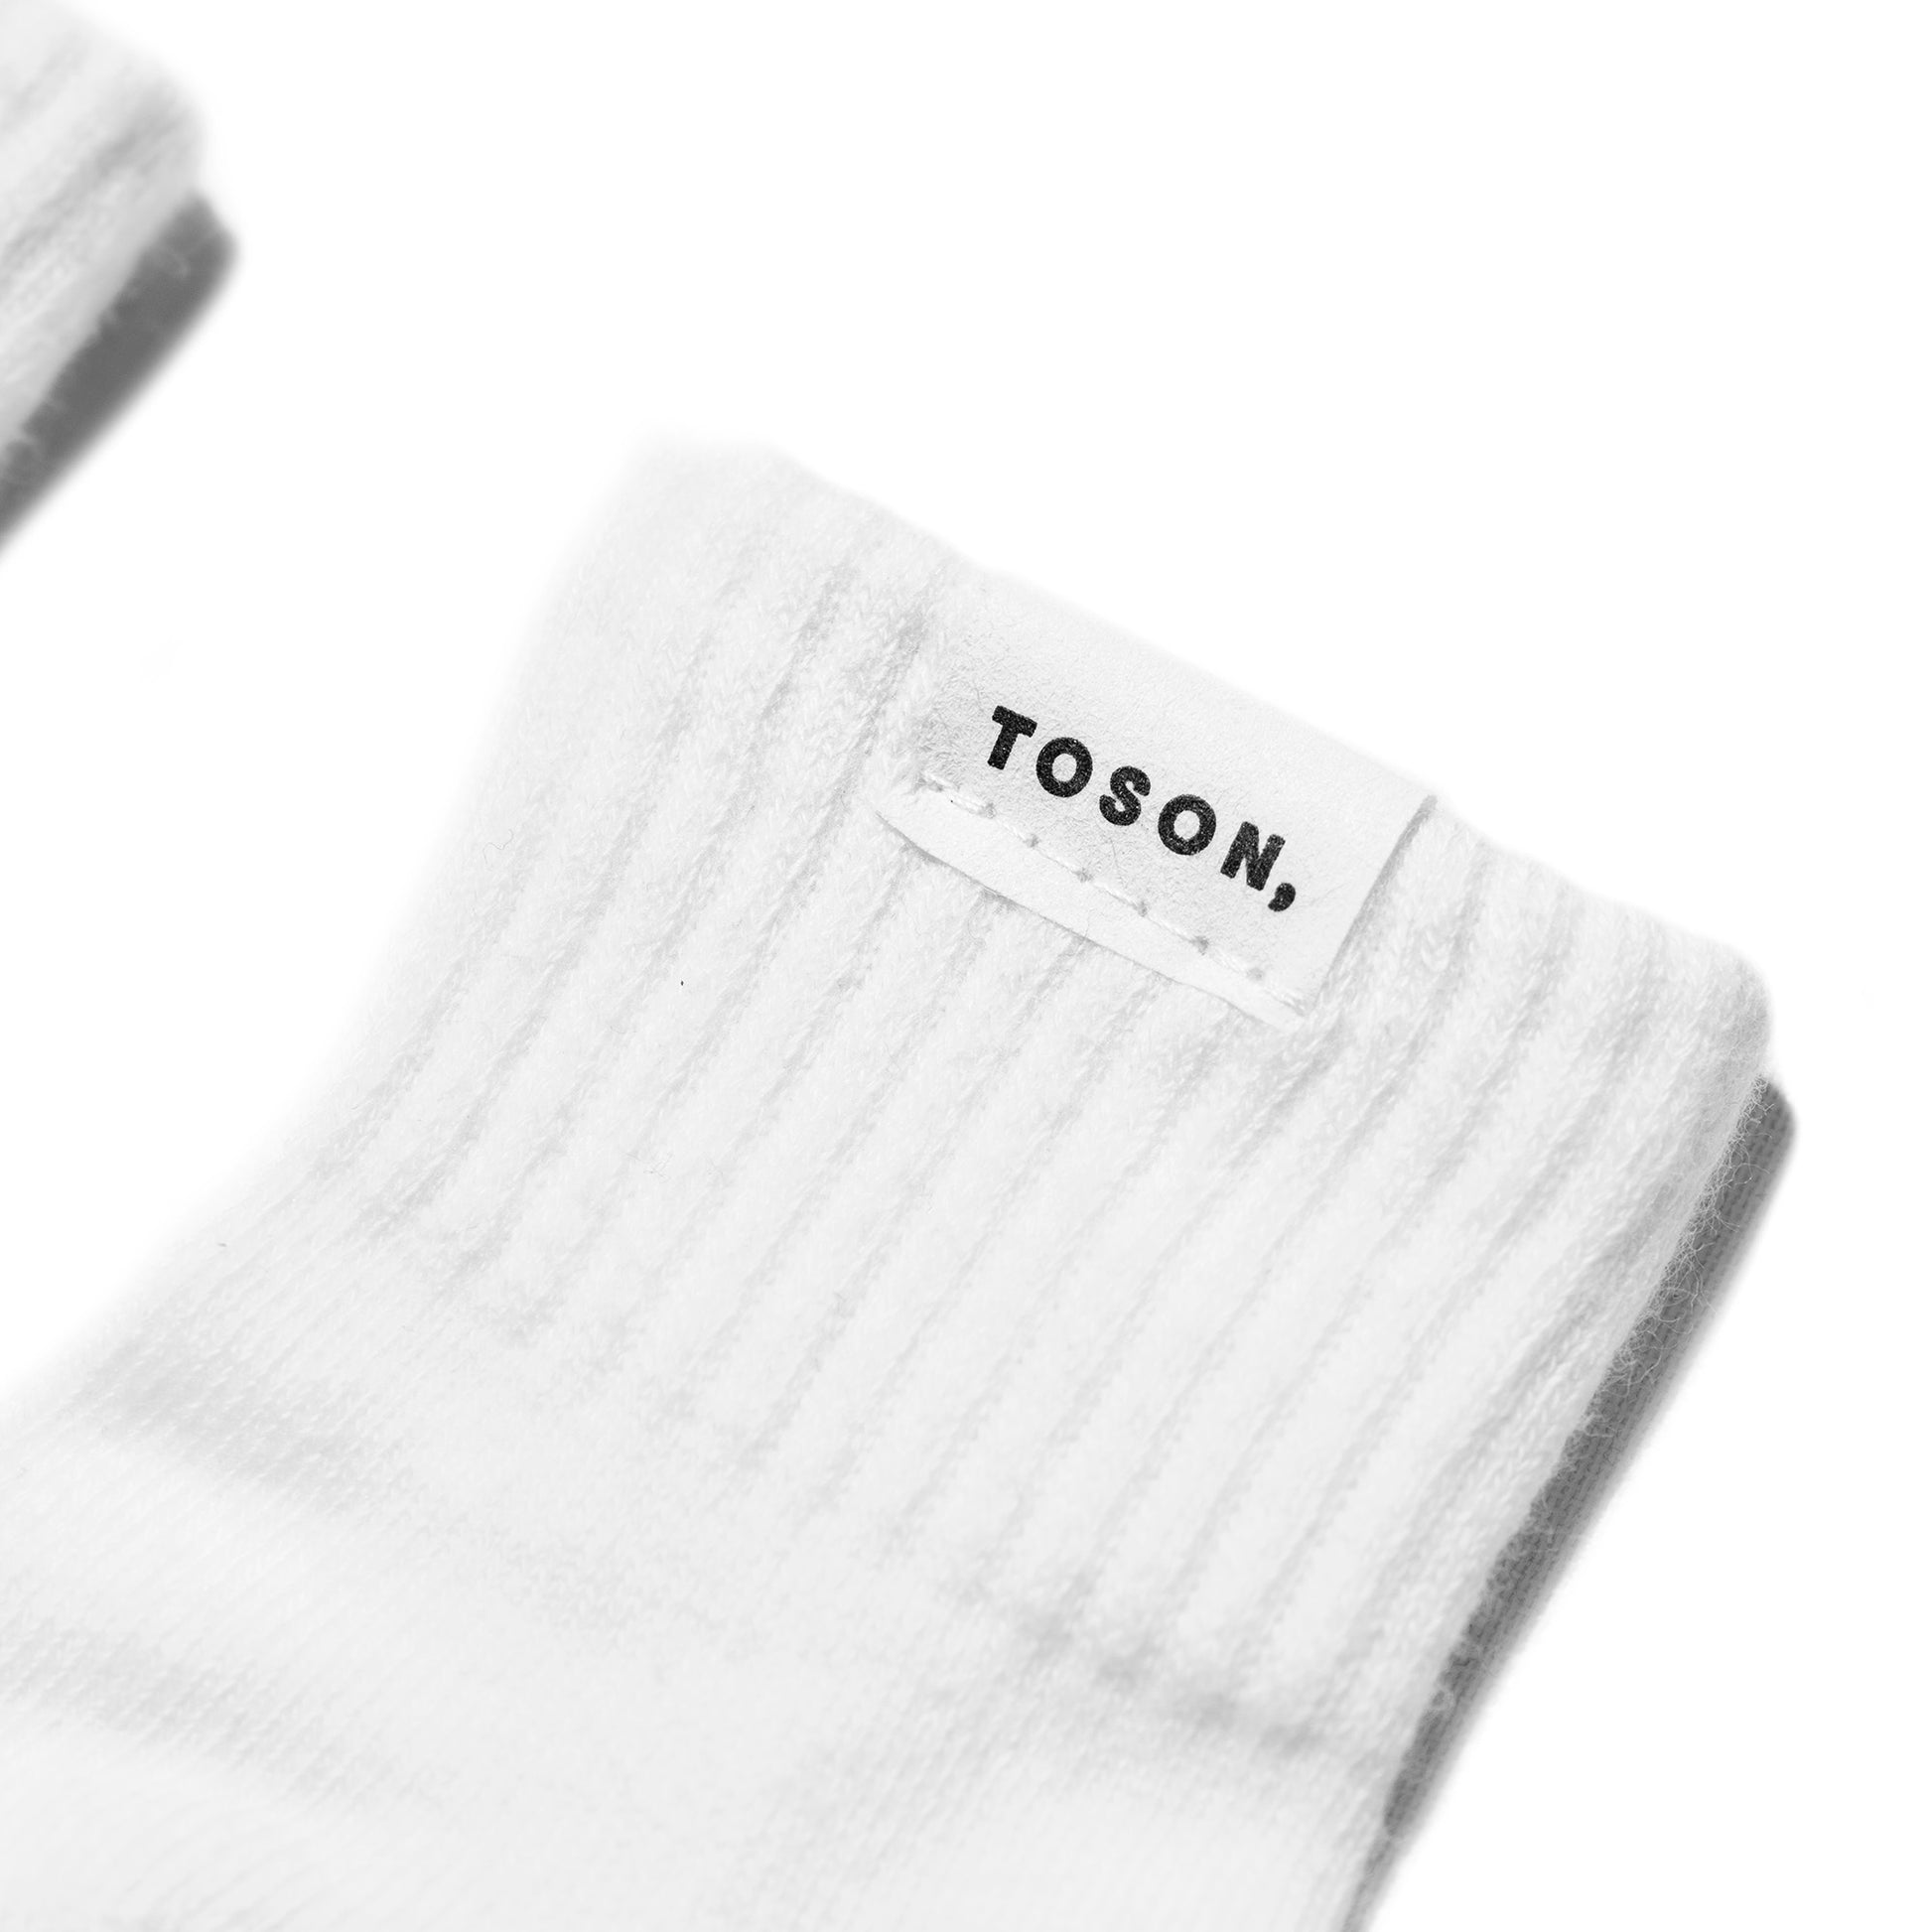 Toson, Baby Inflatable Socks 2 Pack in White